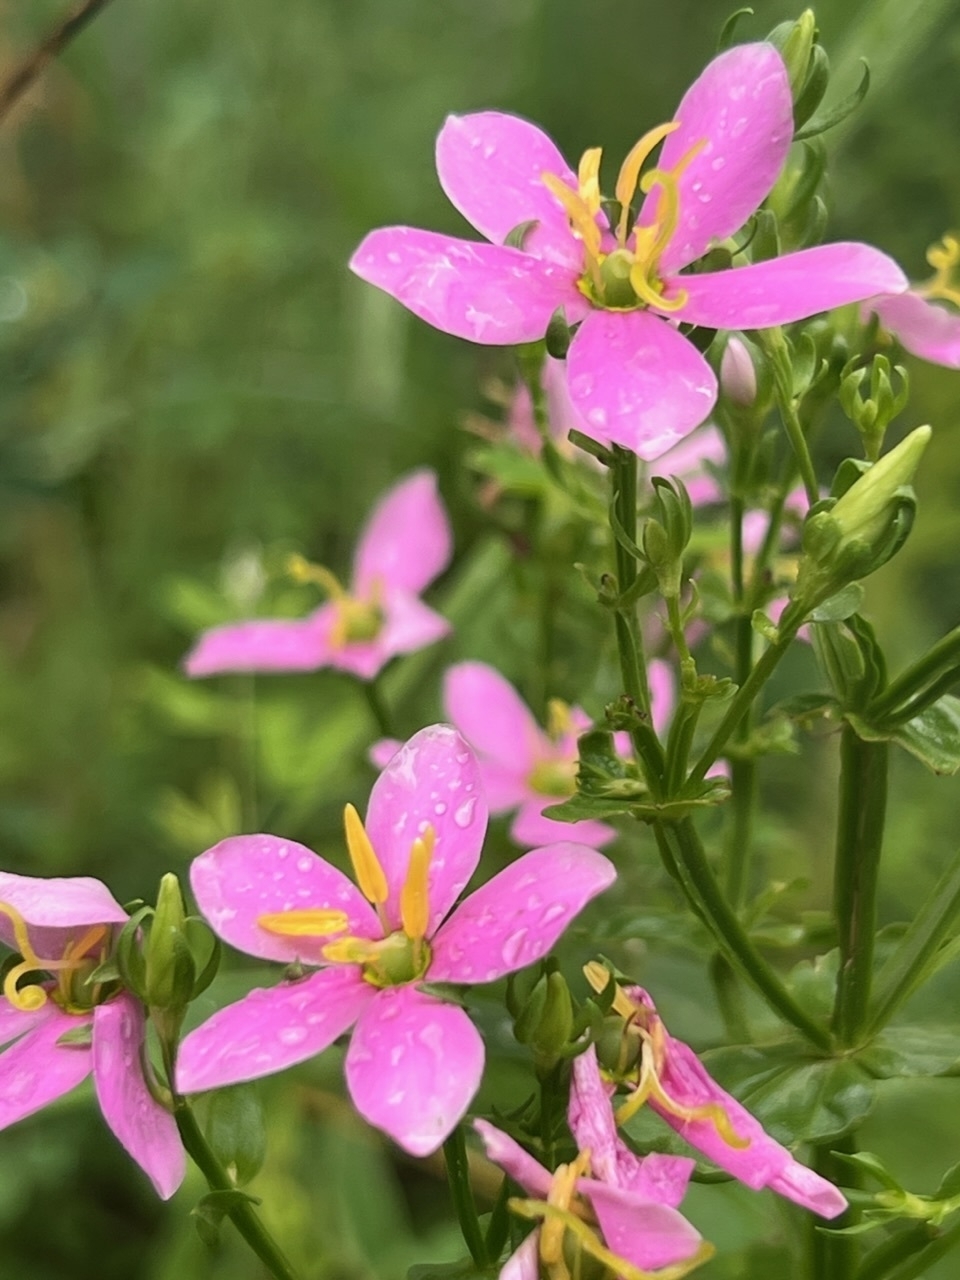 Pink 5 petaled flowers with yellow center